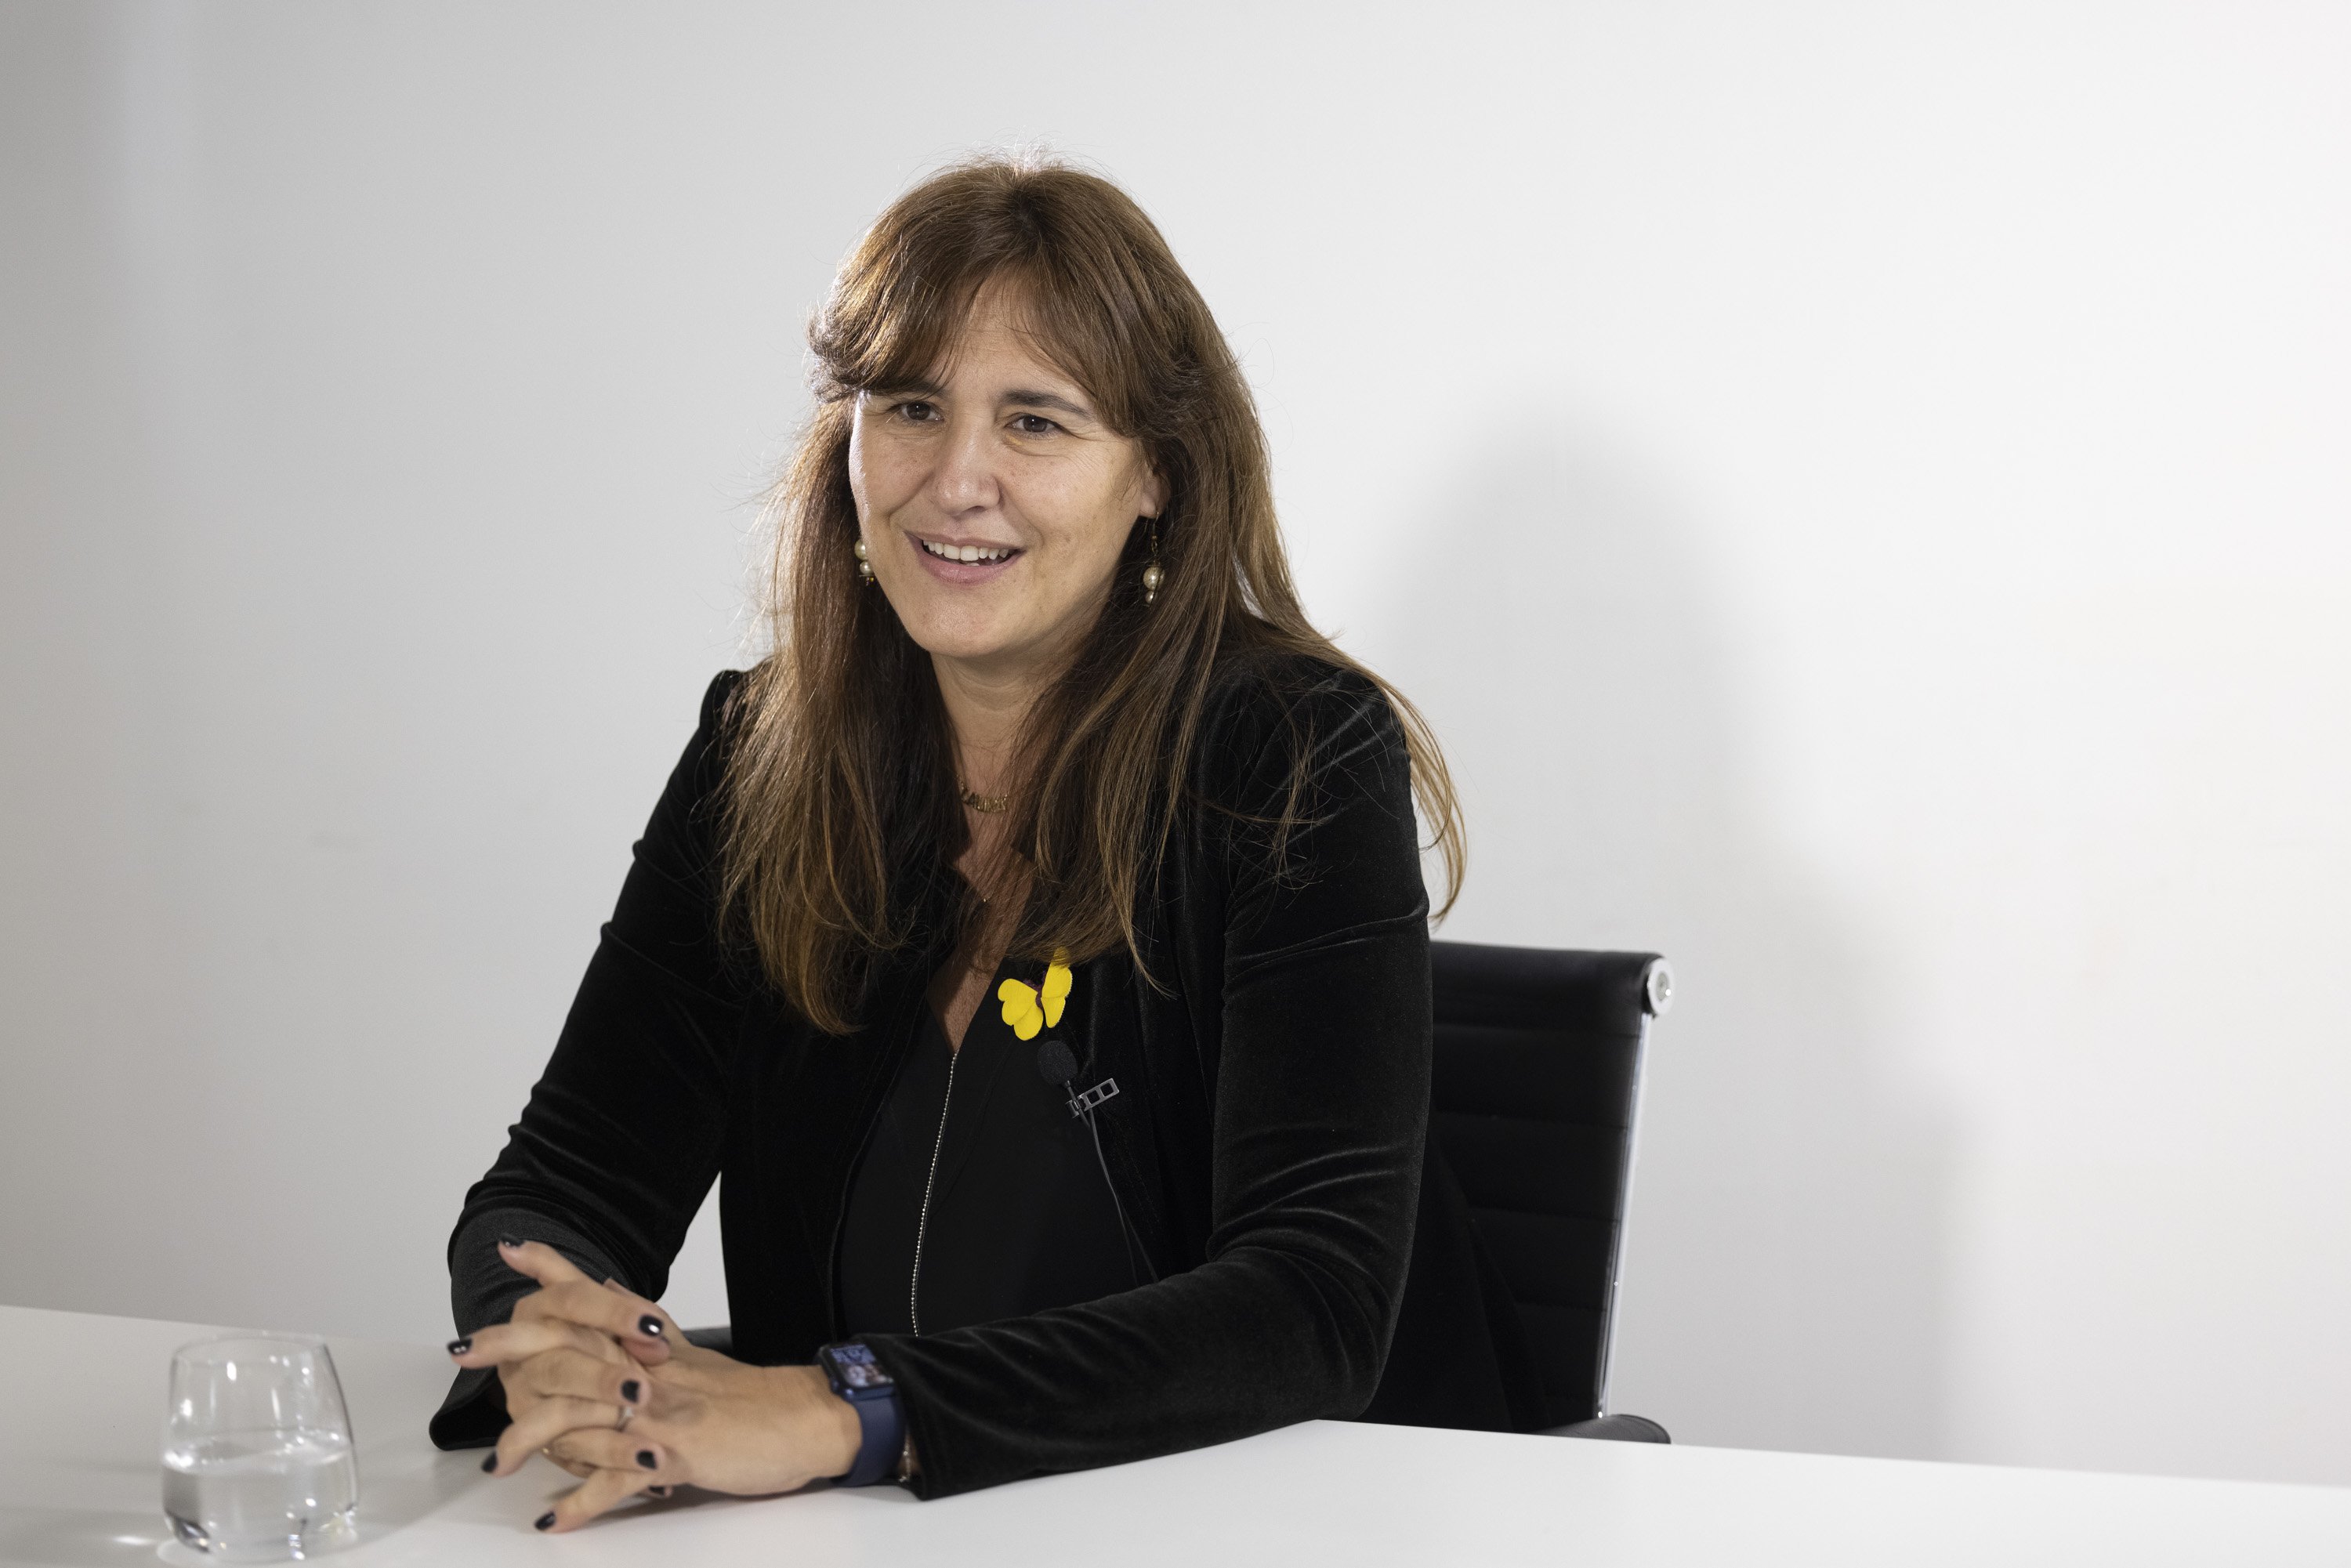 Laura Borràs wins primaries and will be JxCat candidate for Catalan presidency